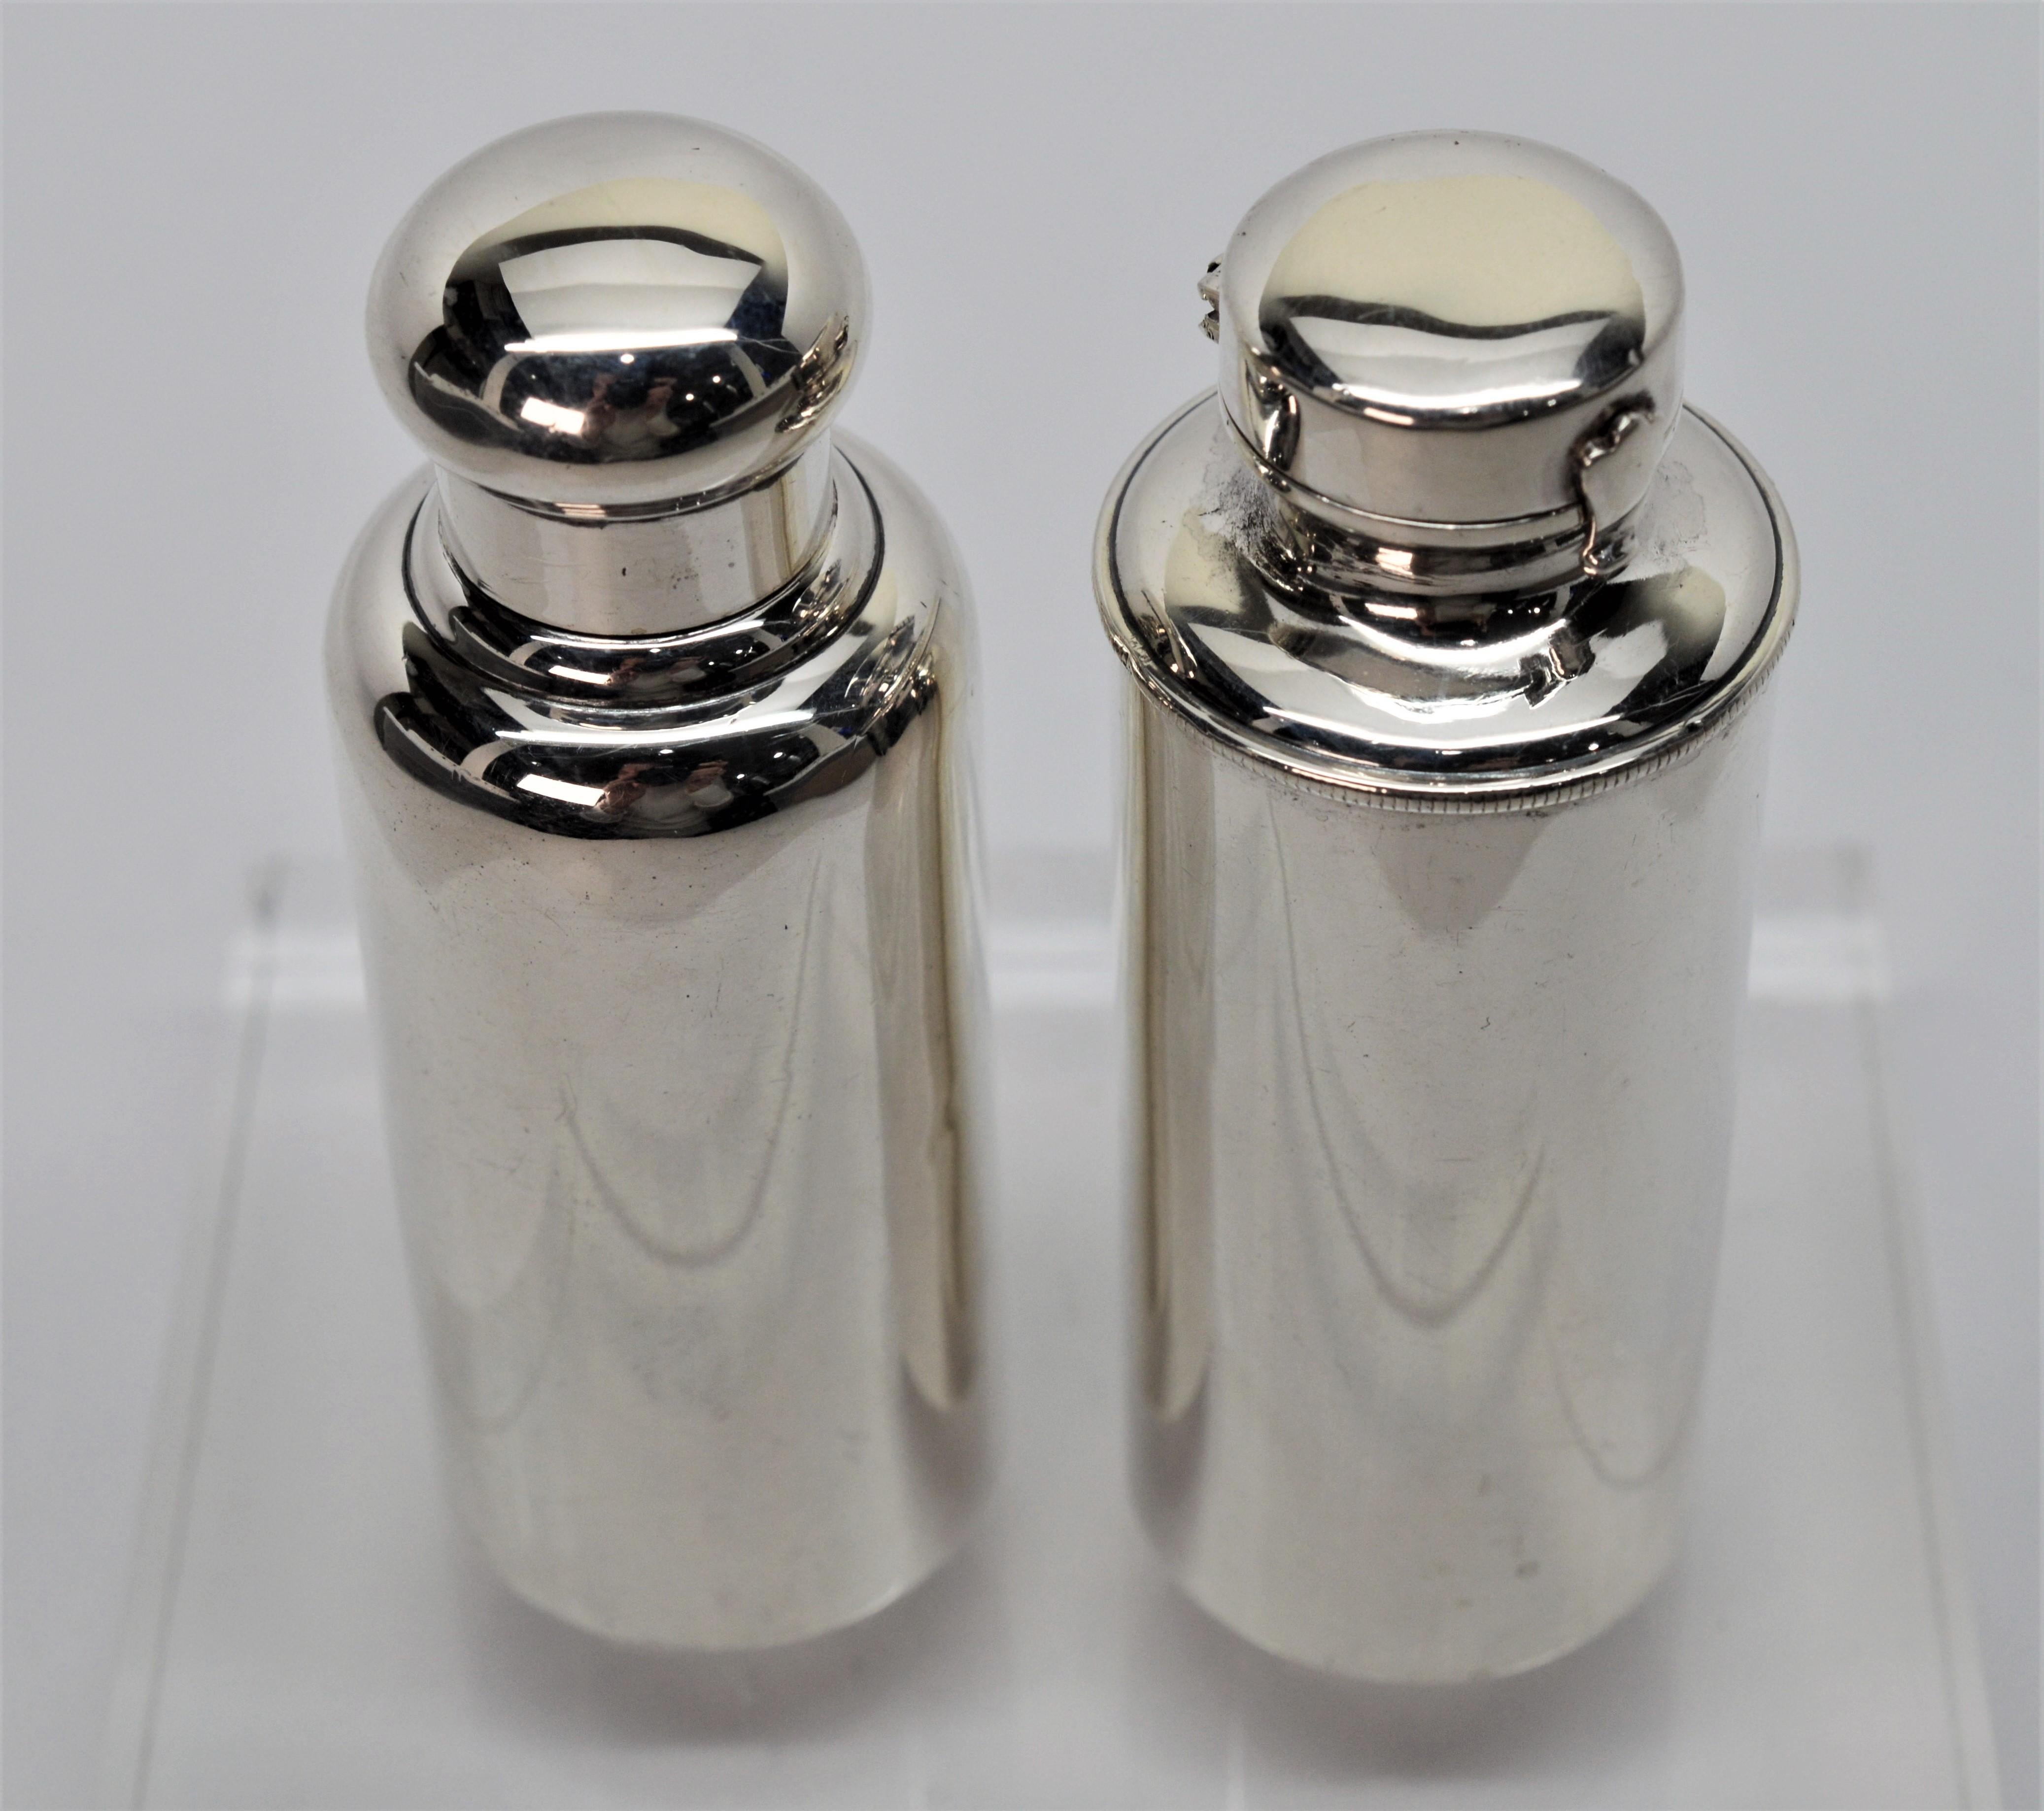 Darling Tiffany & Co. antique sterling silver cosmetic containers give your vanity a personal touch. Circa 1900, the pair of finely made canisters can hold your favorite lotions and powders.  Each piece has a secure top, able to travel with you in